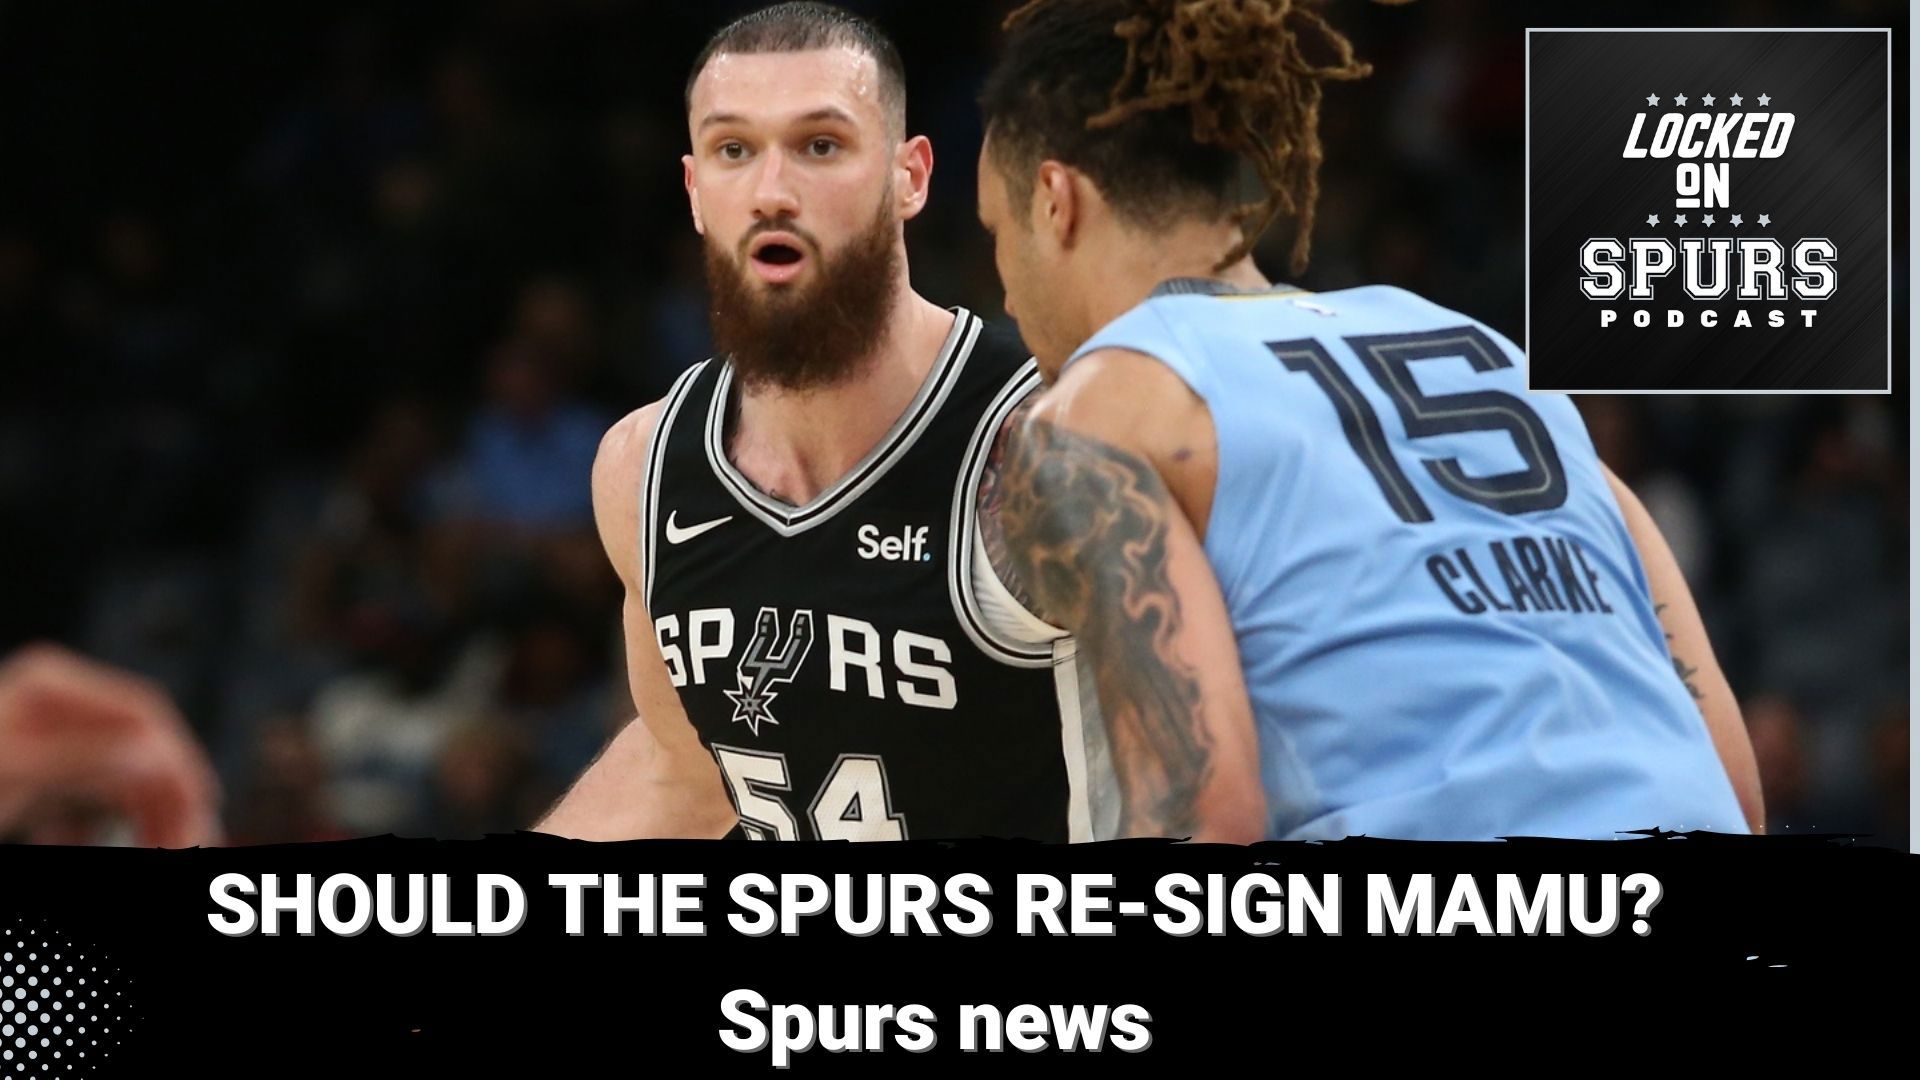 Also, we read some Locked On Spurs fan comments.